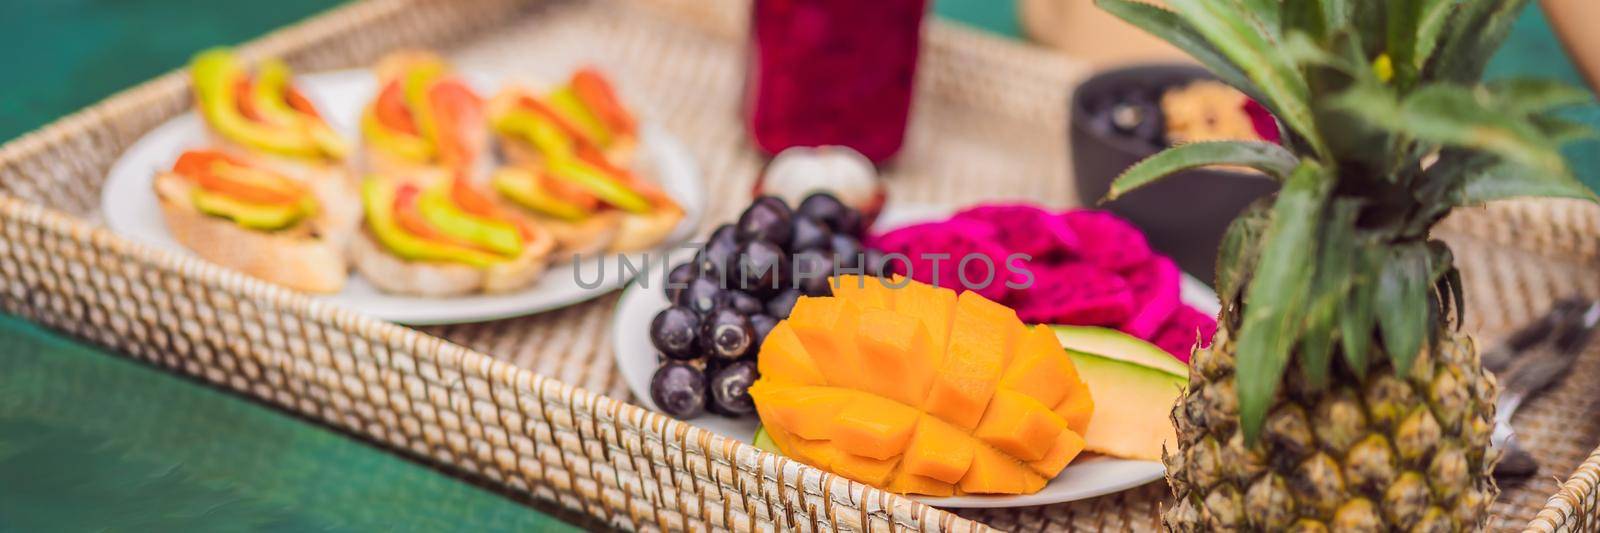 BANNER, LONG FORMAT Breakfast tray in swimming pool, floating breakfast in luxury hotel. Girl relaxing in the pool drinking smoothies and eating fruit plate, smoothie bowl by the hotel pool. Exotic summer diet. Tropical beach lifestyle. Bali Trend by galitskaya